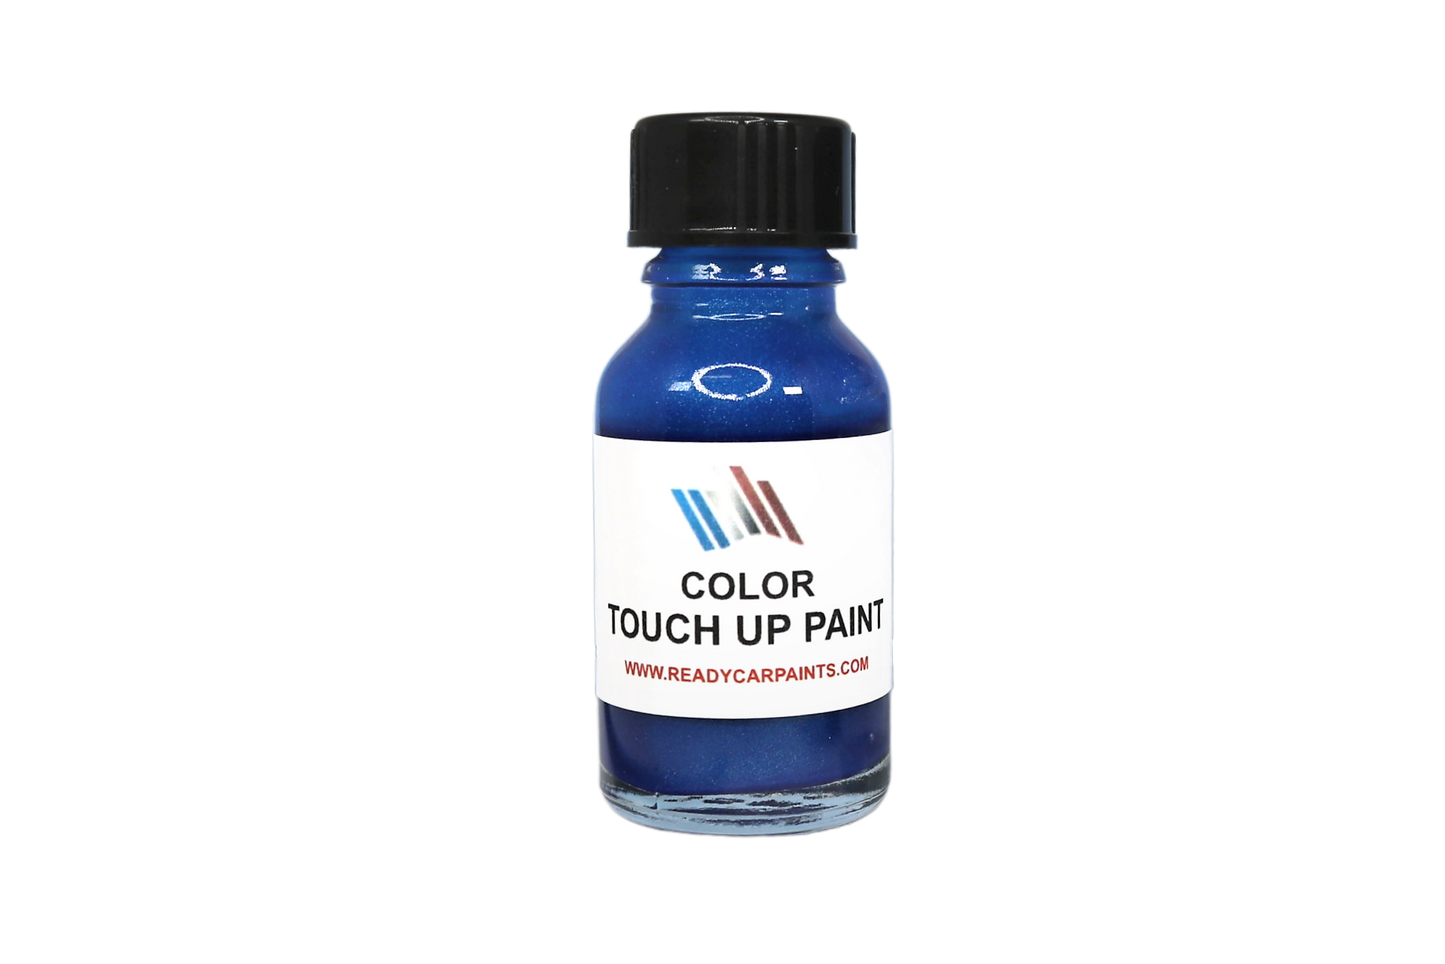 AUDI LB9A/B4 Cortina White Touch Up Paint Kit 100% OEM Color Match